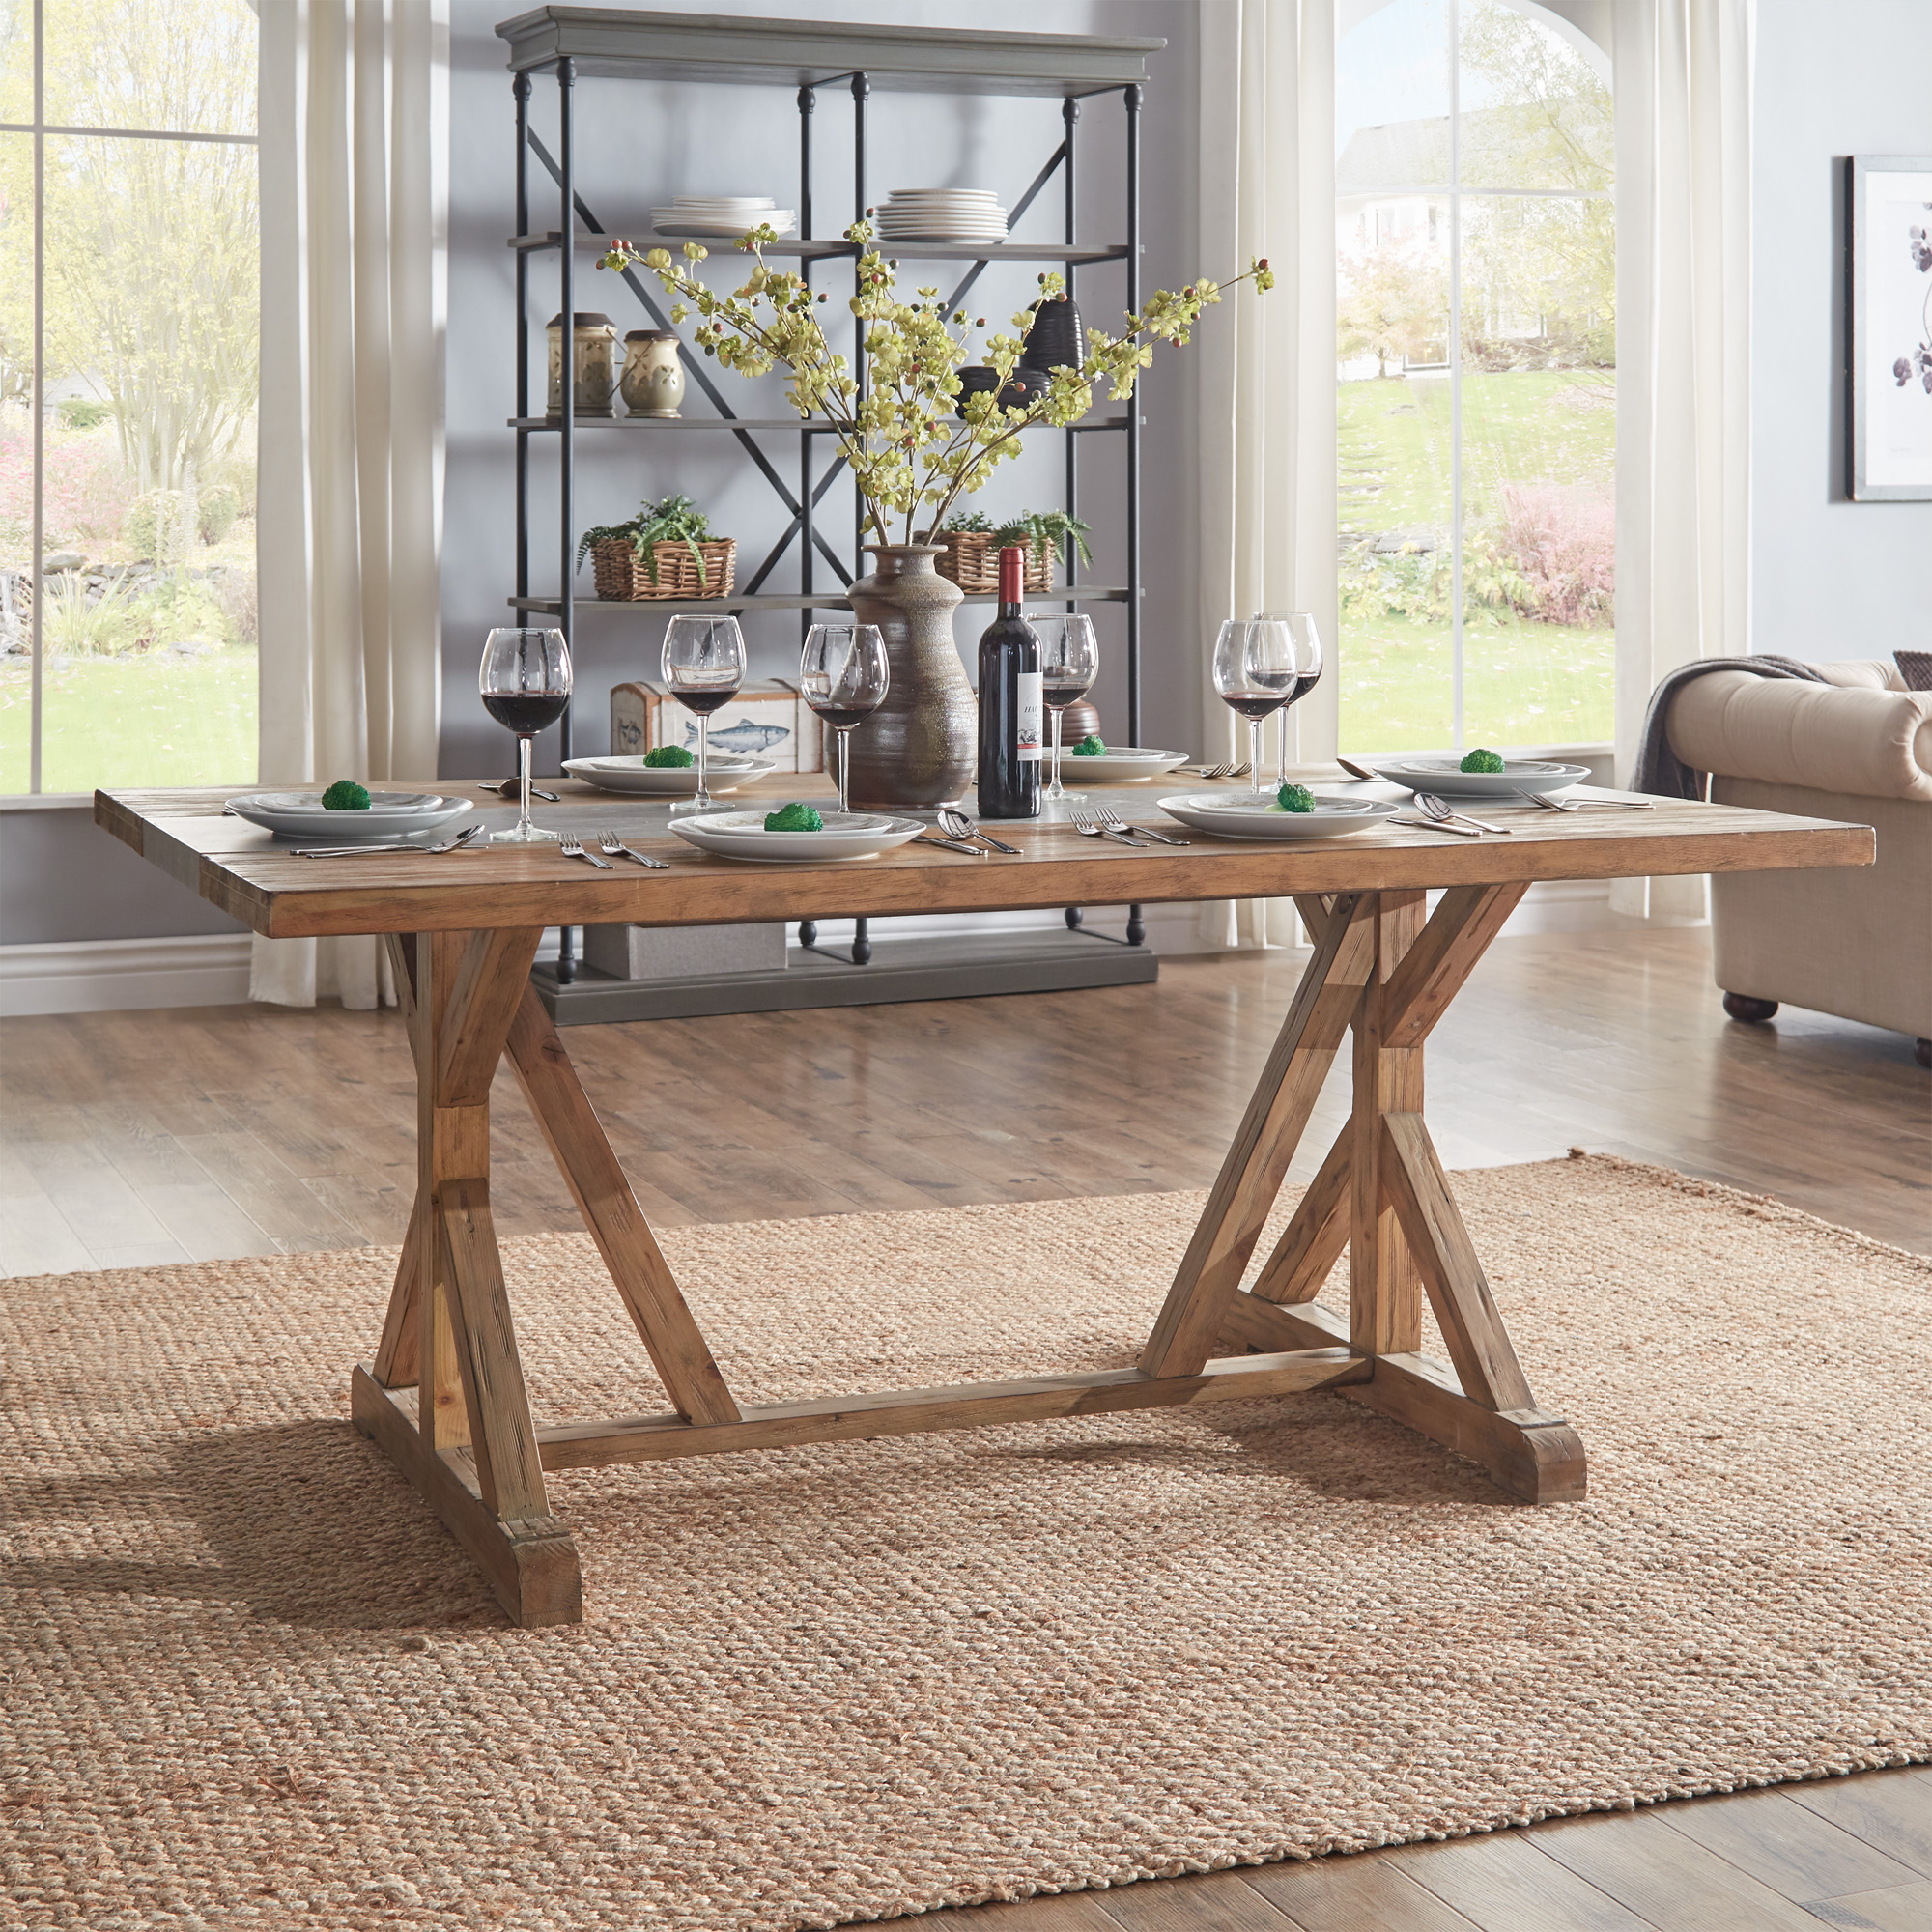 Rustic Pine Concrete Table Top Dining Table